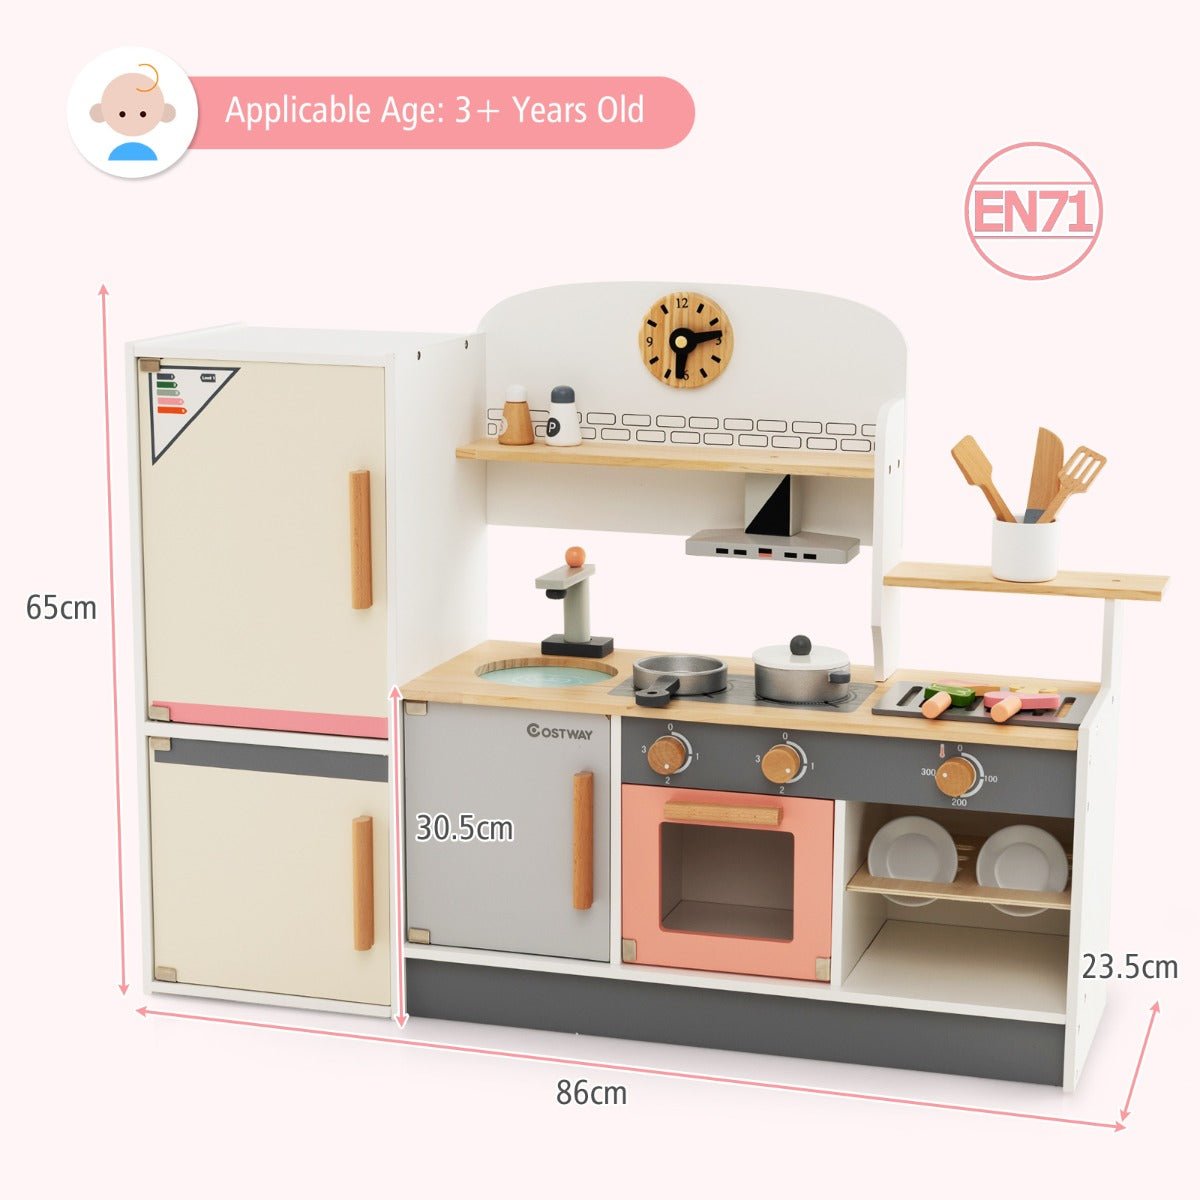 Measurements Modern Play Kitchen with Range Hood for Kids